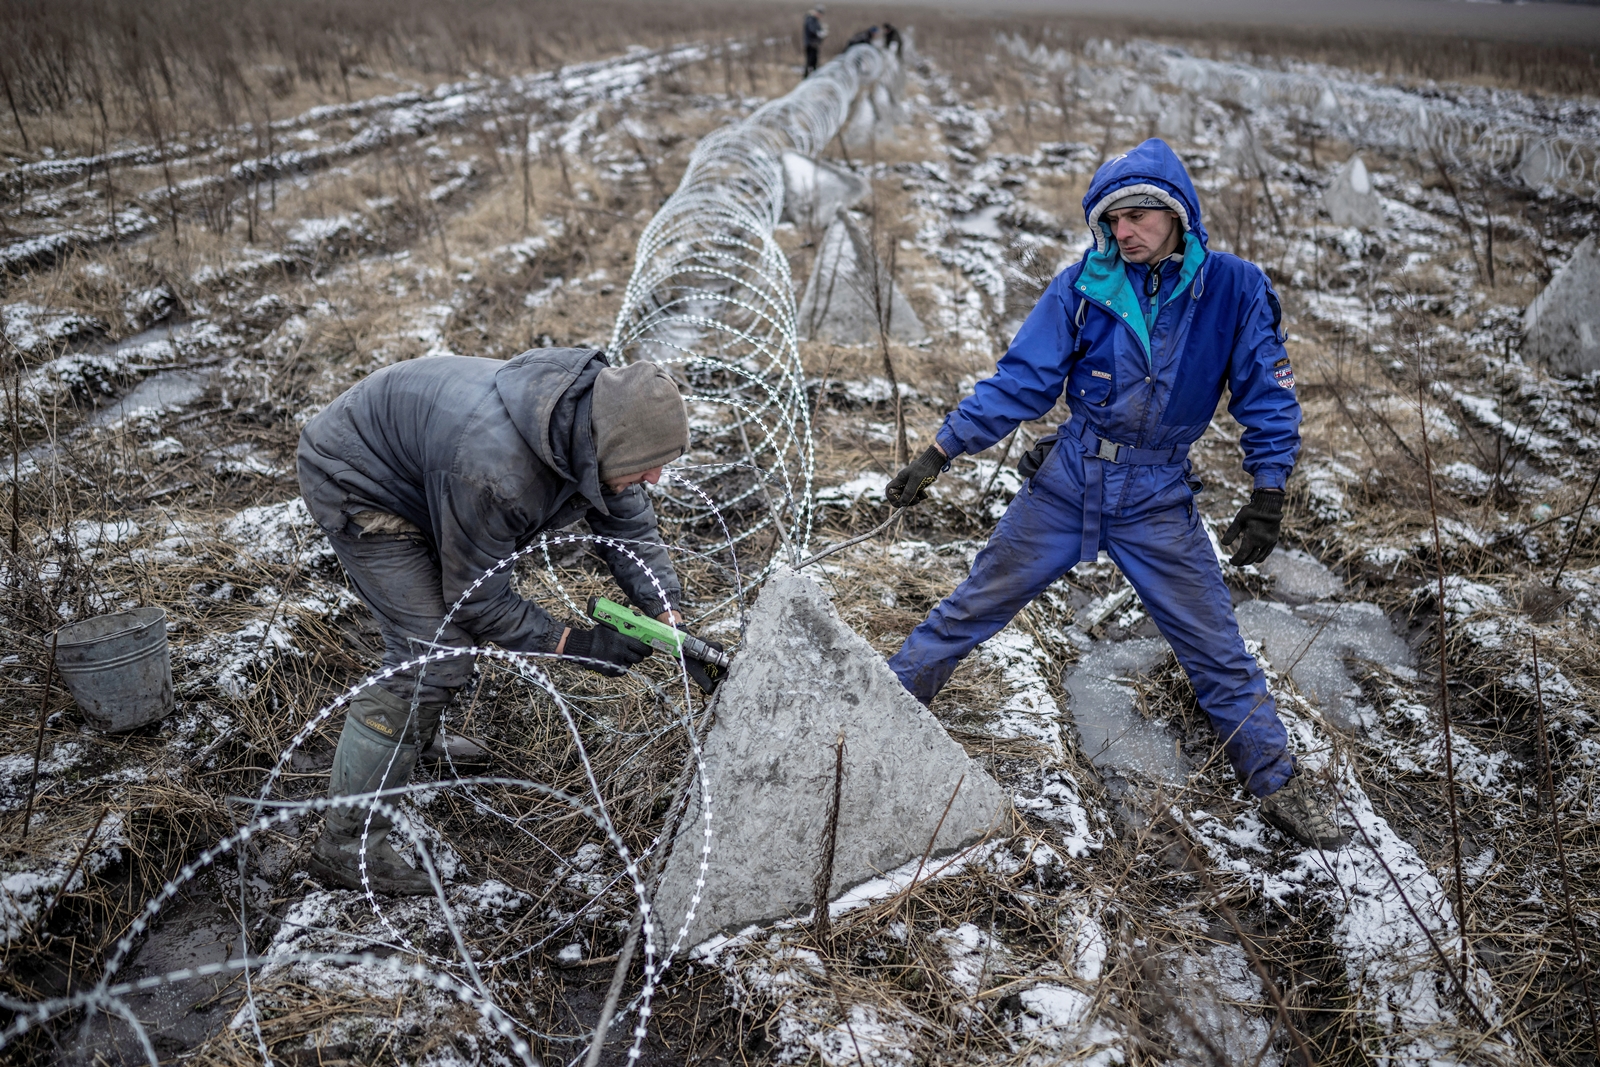 Workers install razor wire as a part of defence structures near a front line, amid Russia's attack on Ukraine, in the Kharkiv region, Ukraine December 25, 2023. REUTERS/Viacheslav Ratynskyi